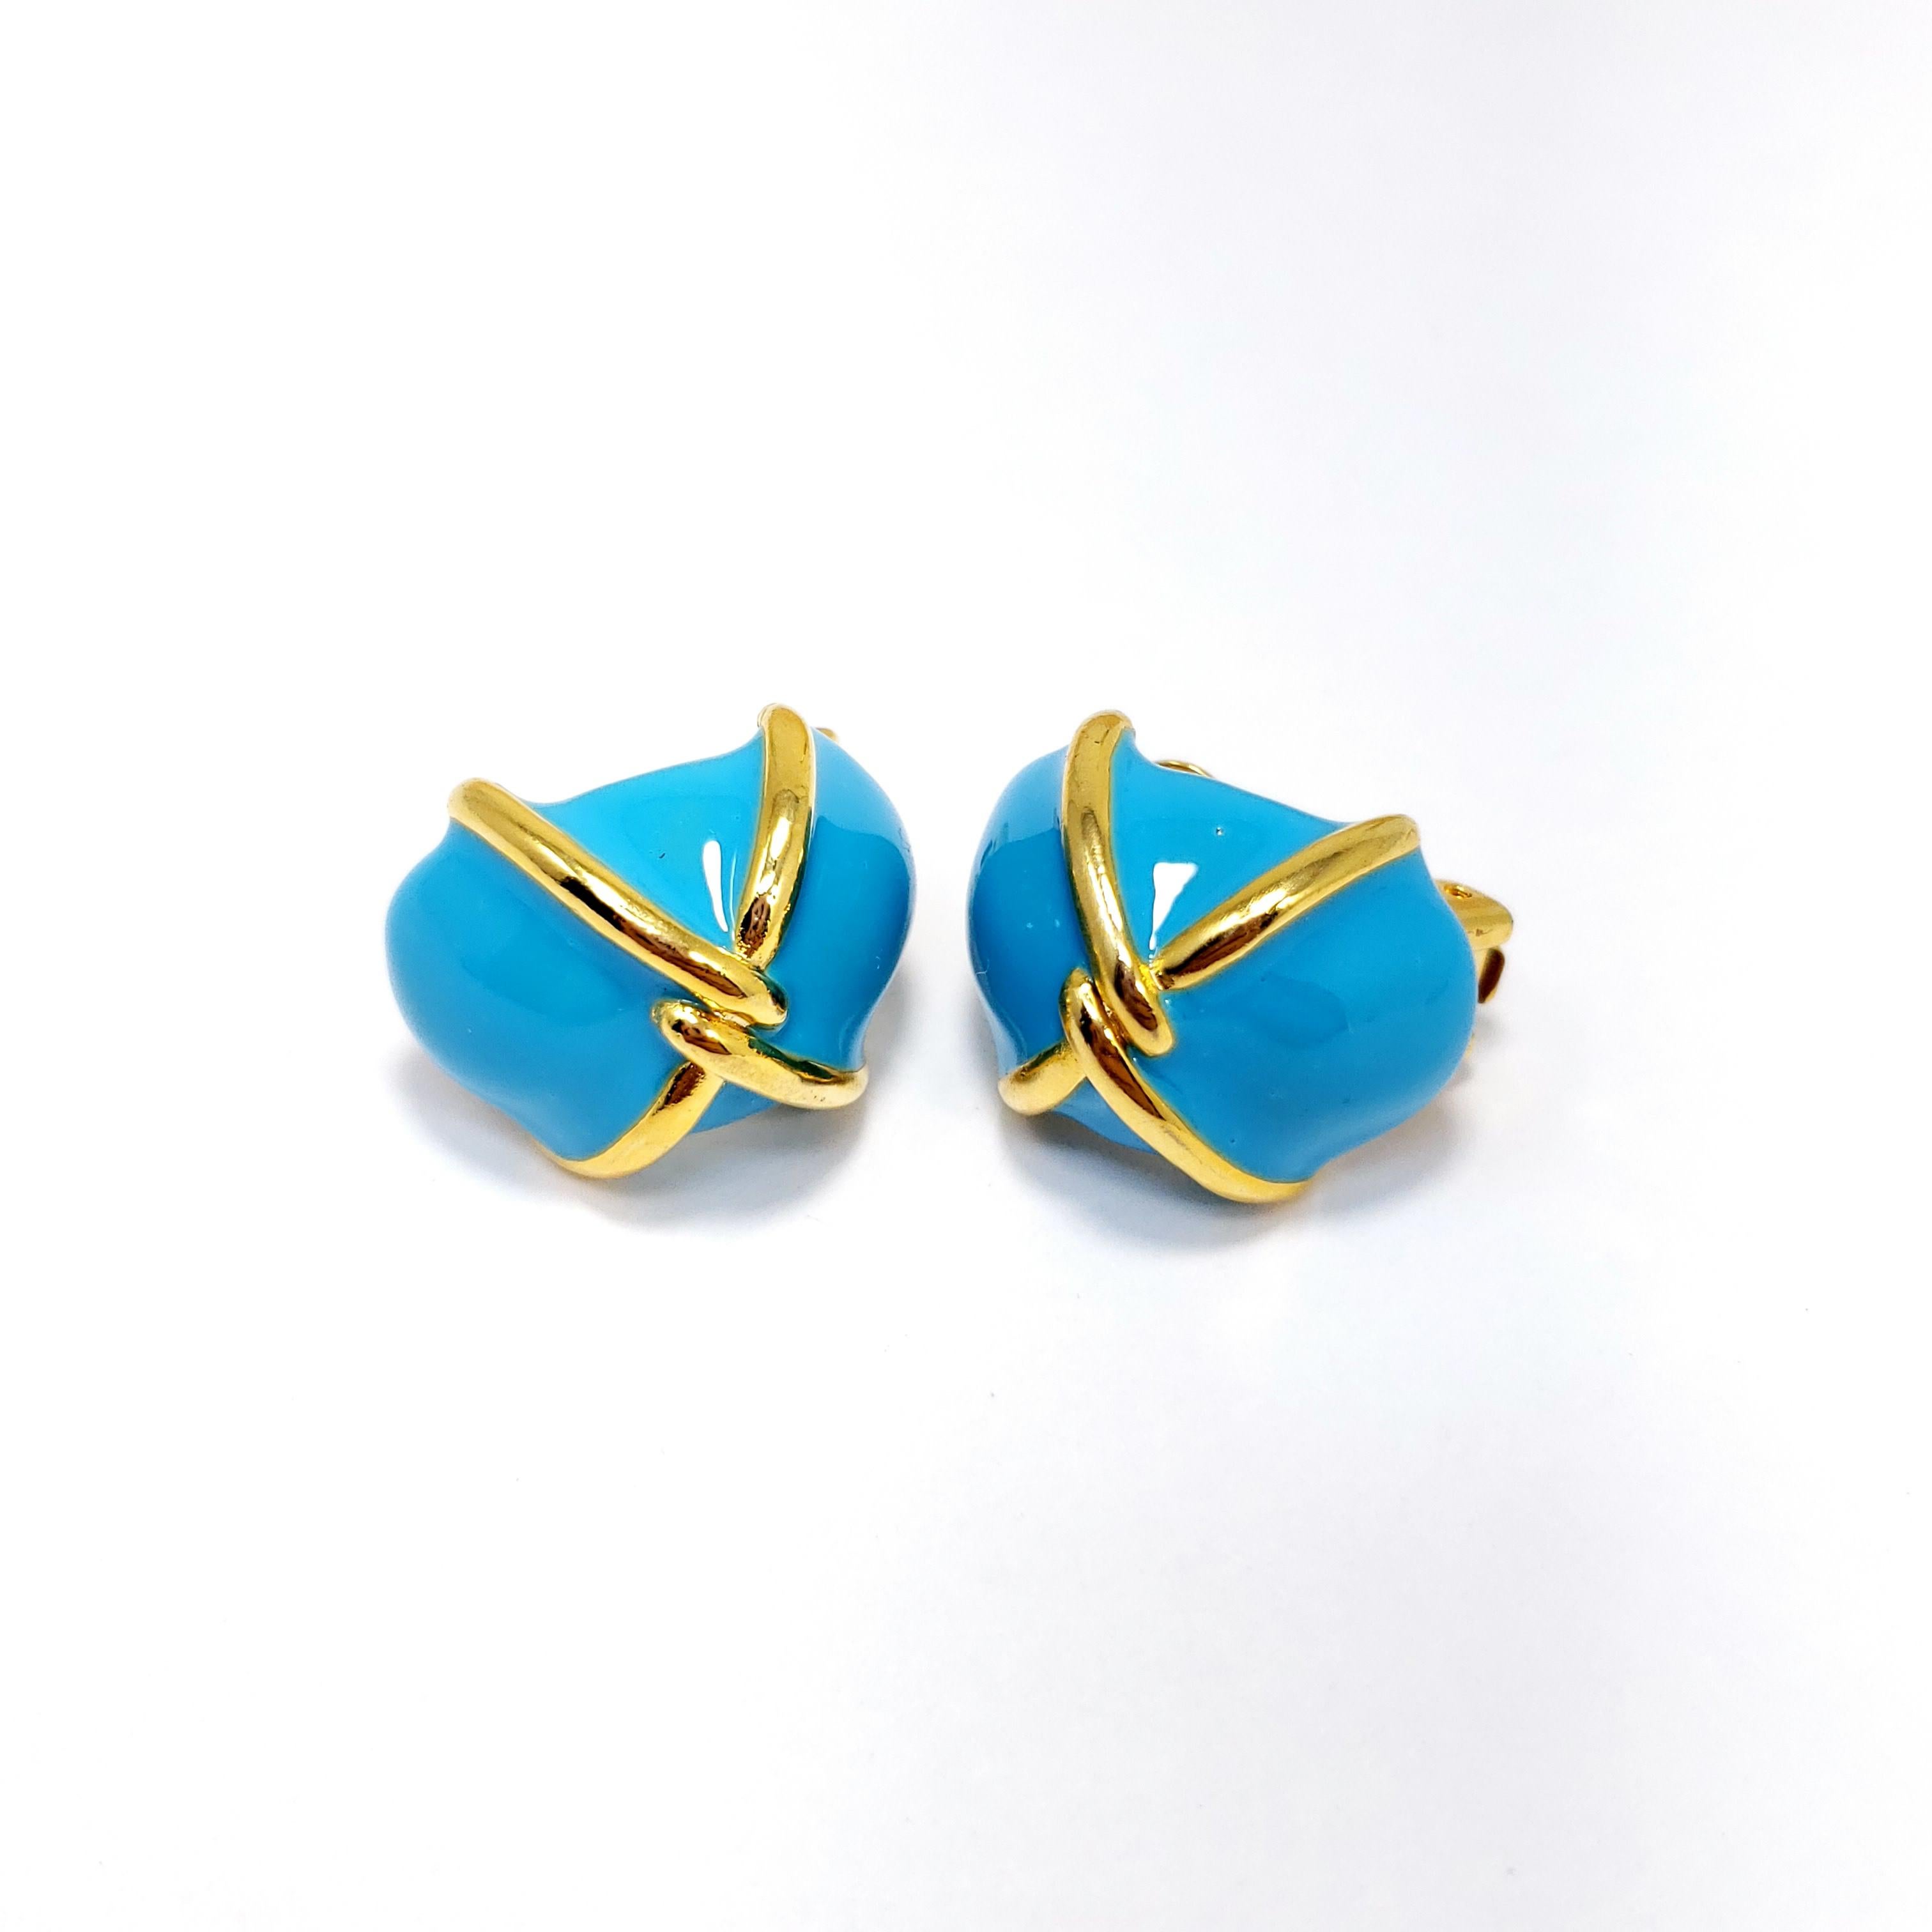 A pair of bright blue turquoise earrings with gold accents. Stylish clip ons by Kenneth Jay Lane.

Hallmarks: KJL, Made in USA